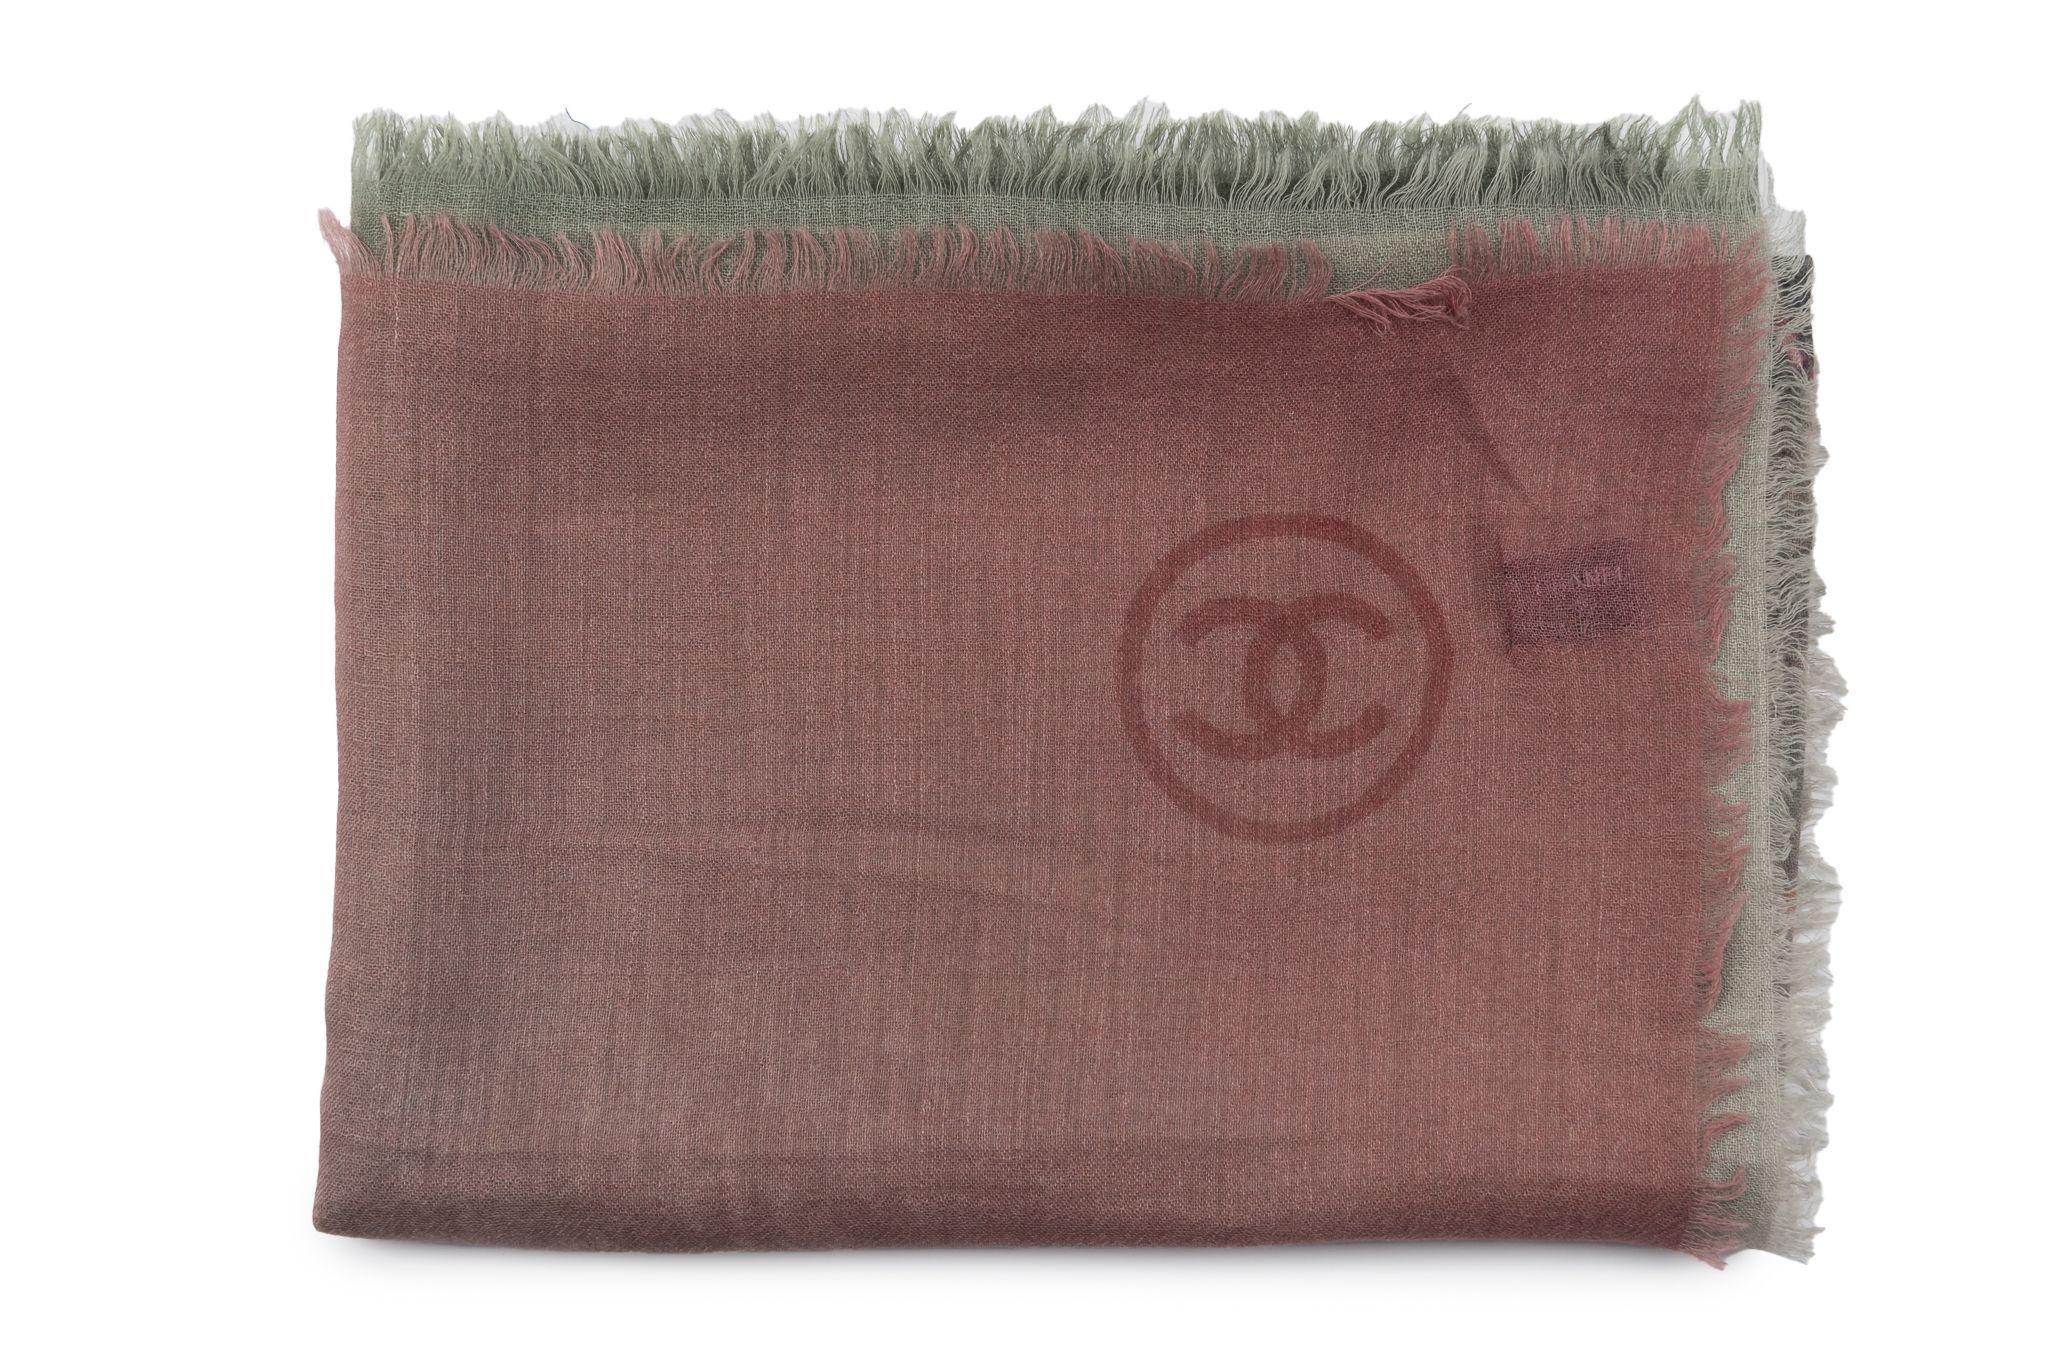 Chanel new tartan cashmere shawl green and pink color combination. Very light and delicate.